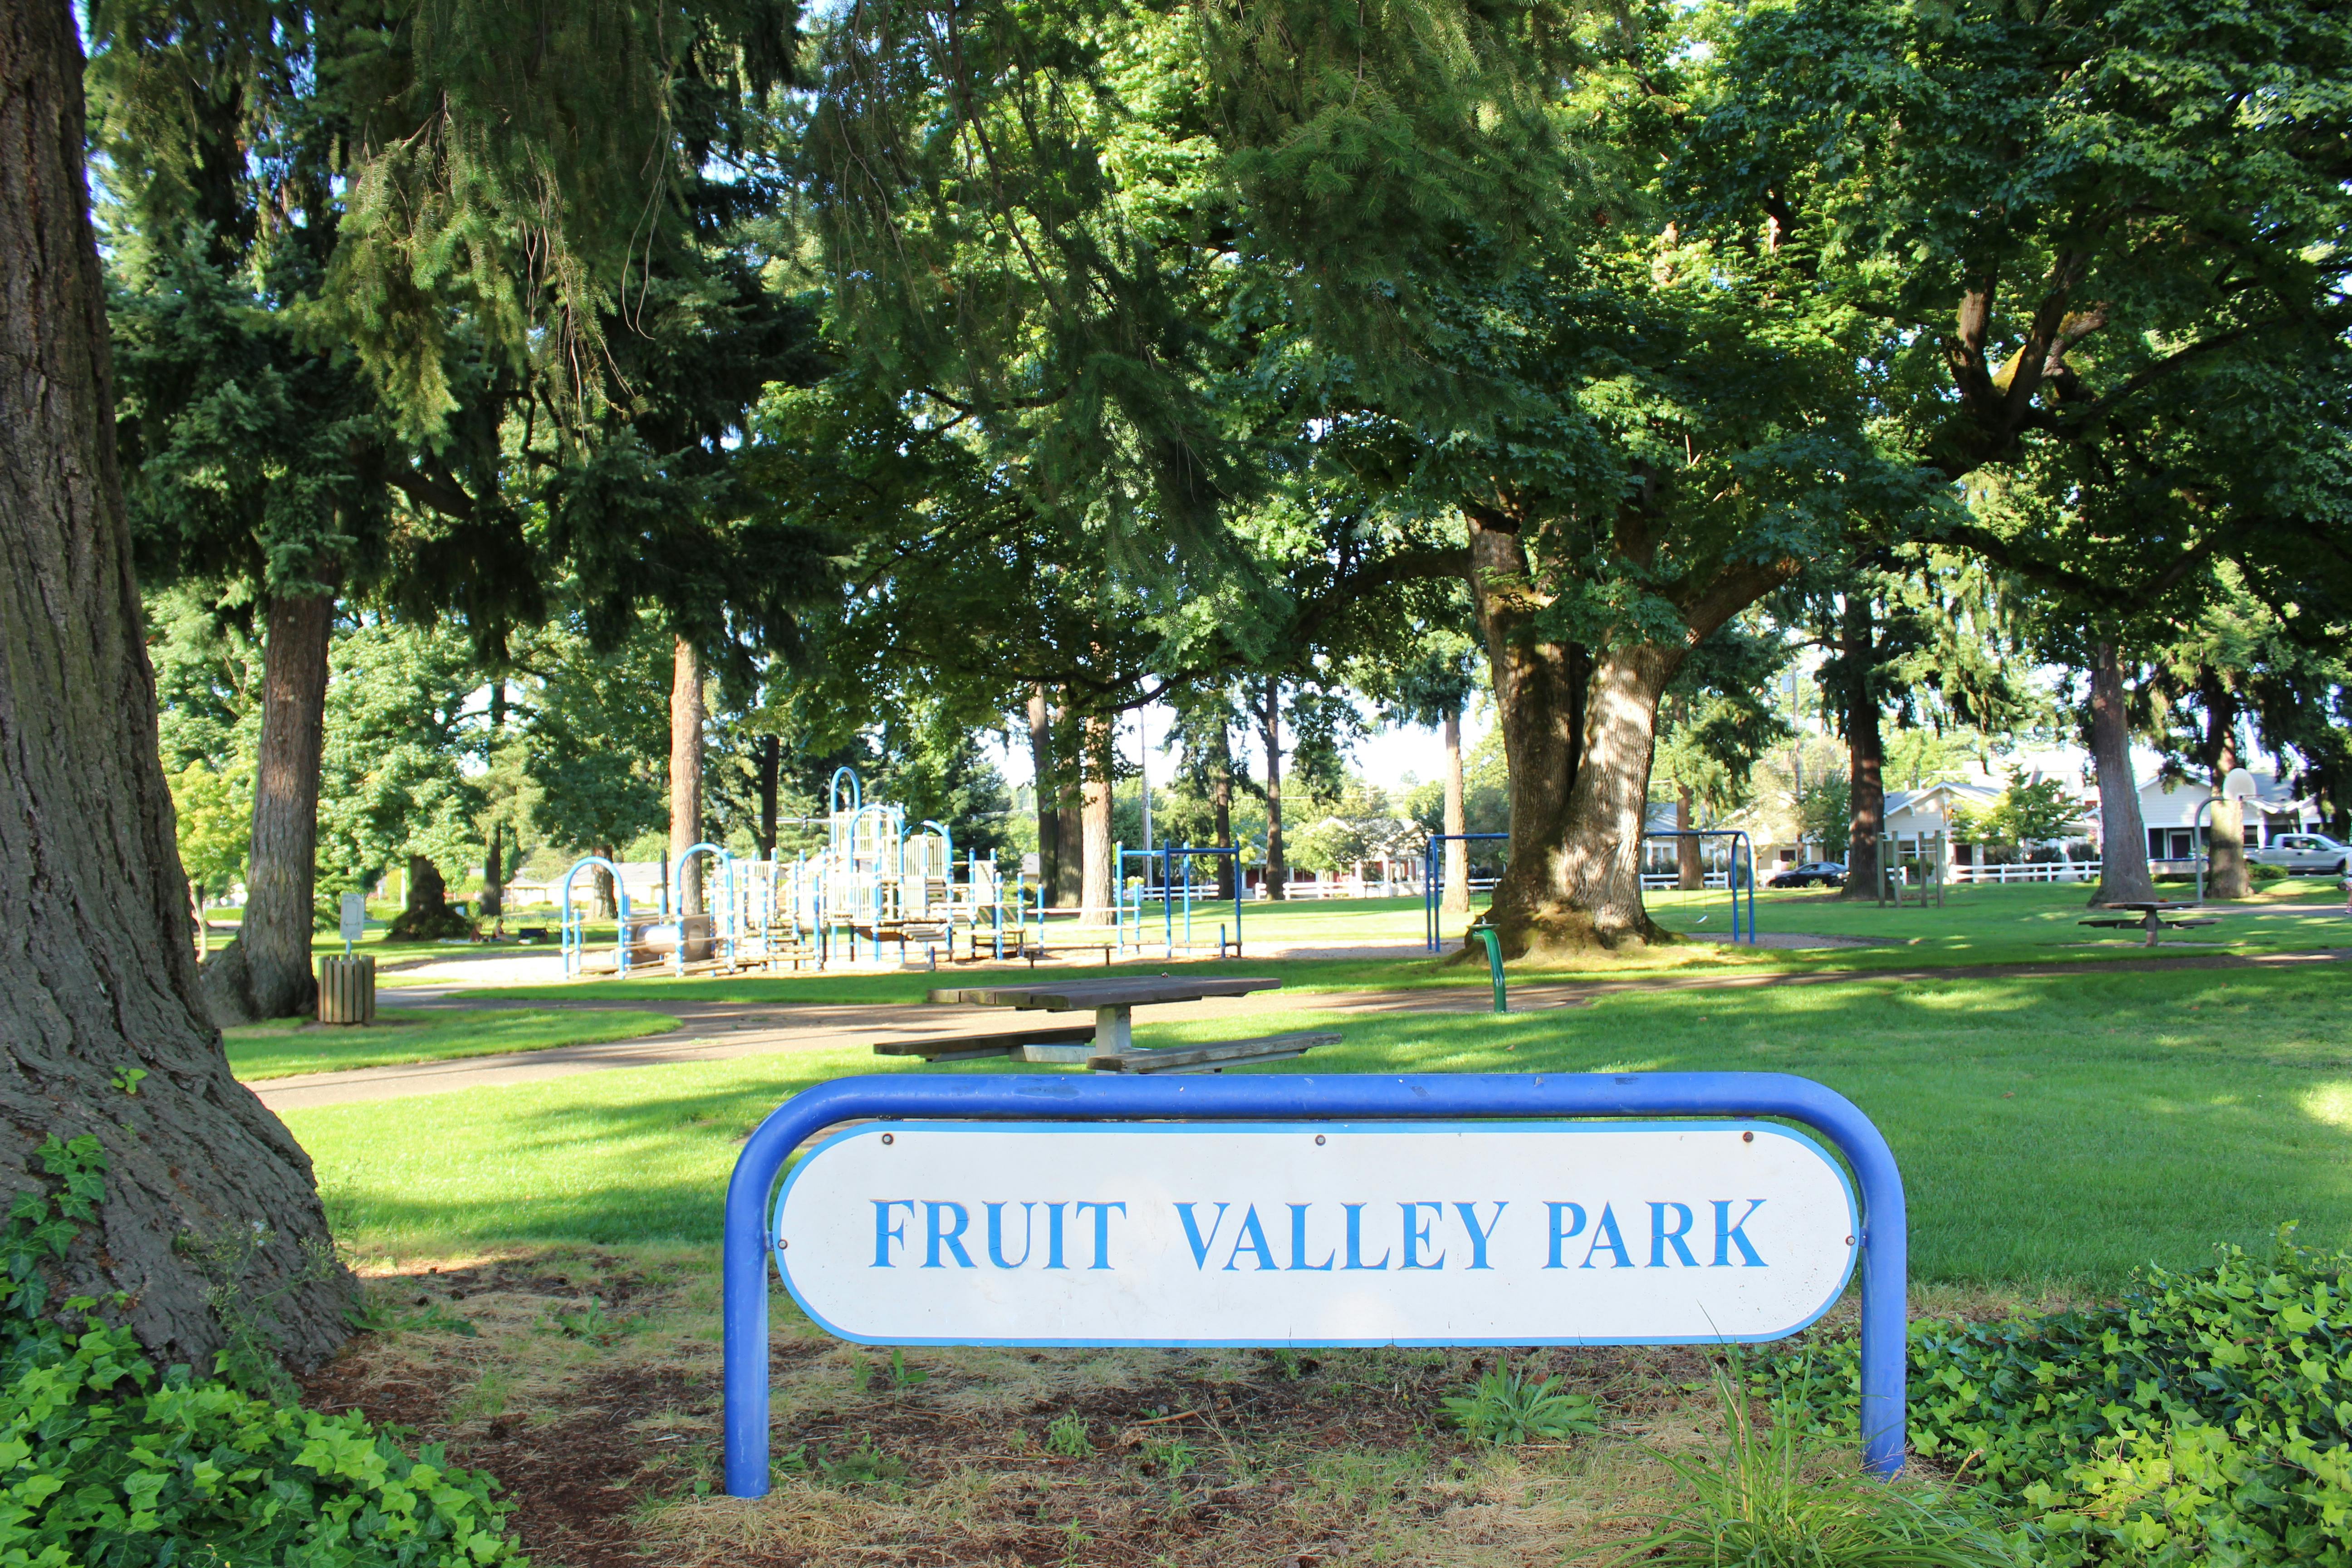 Fruit Valley Park in Vancouver, Washington